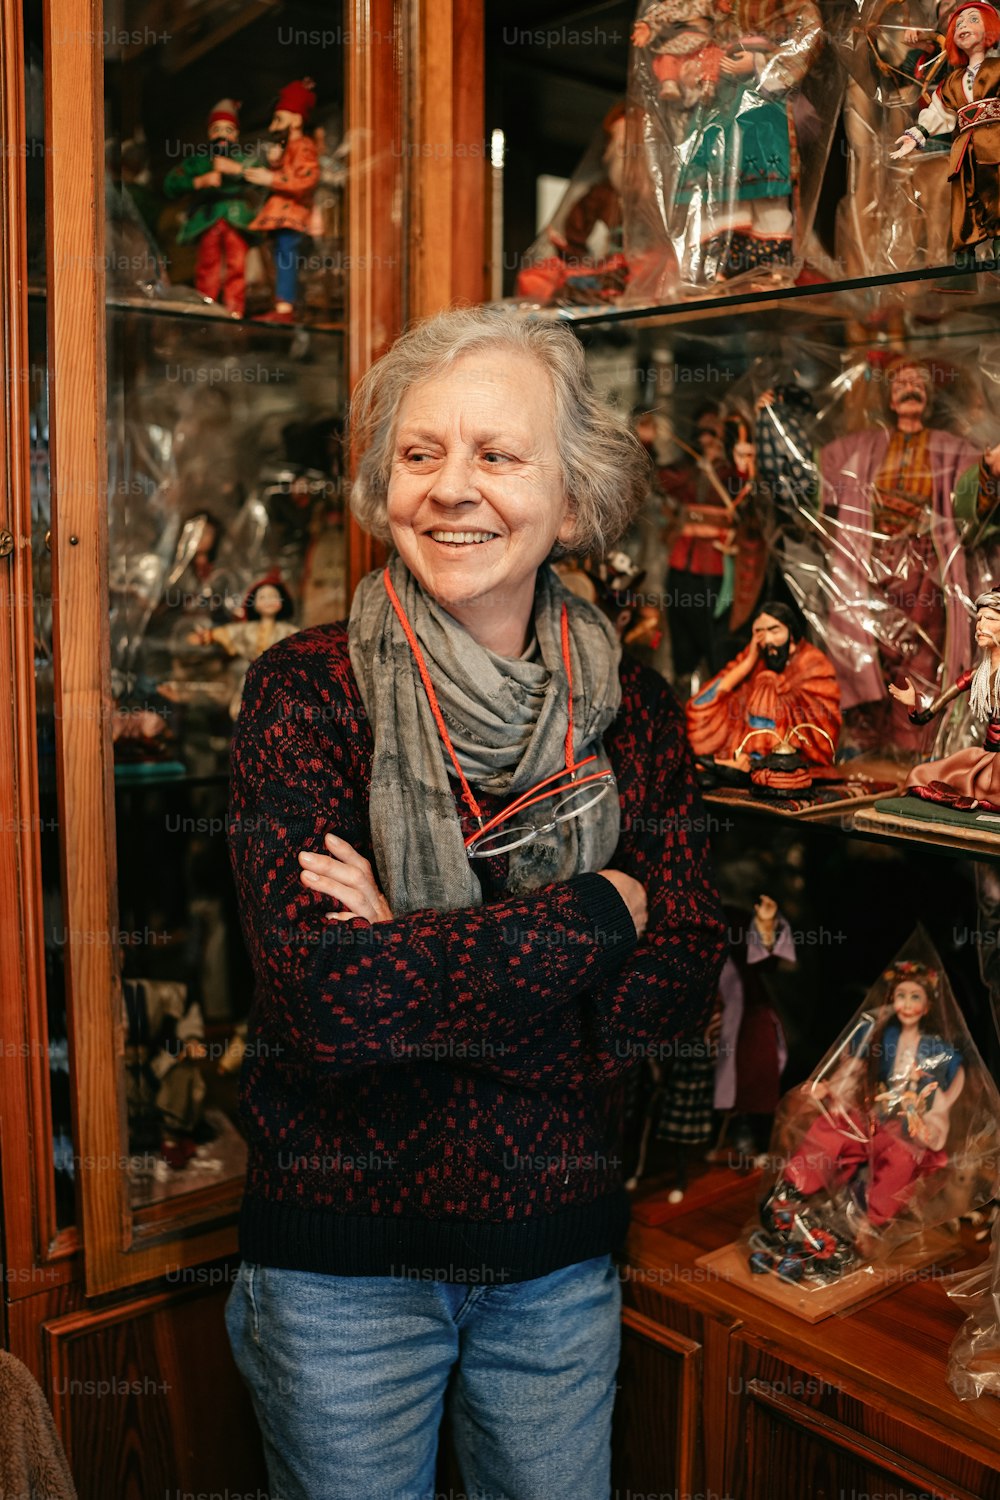 a woman standing in front of a glass case filled with figurines